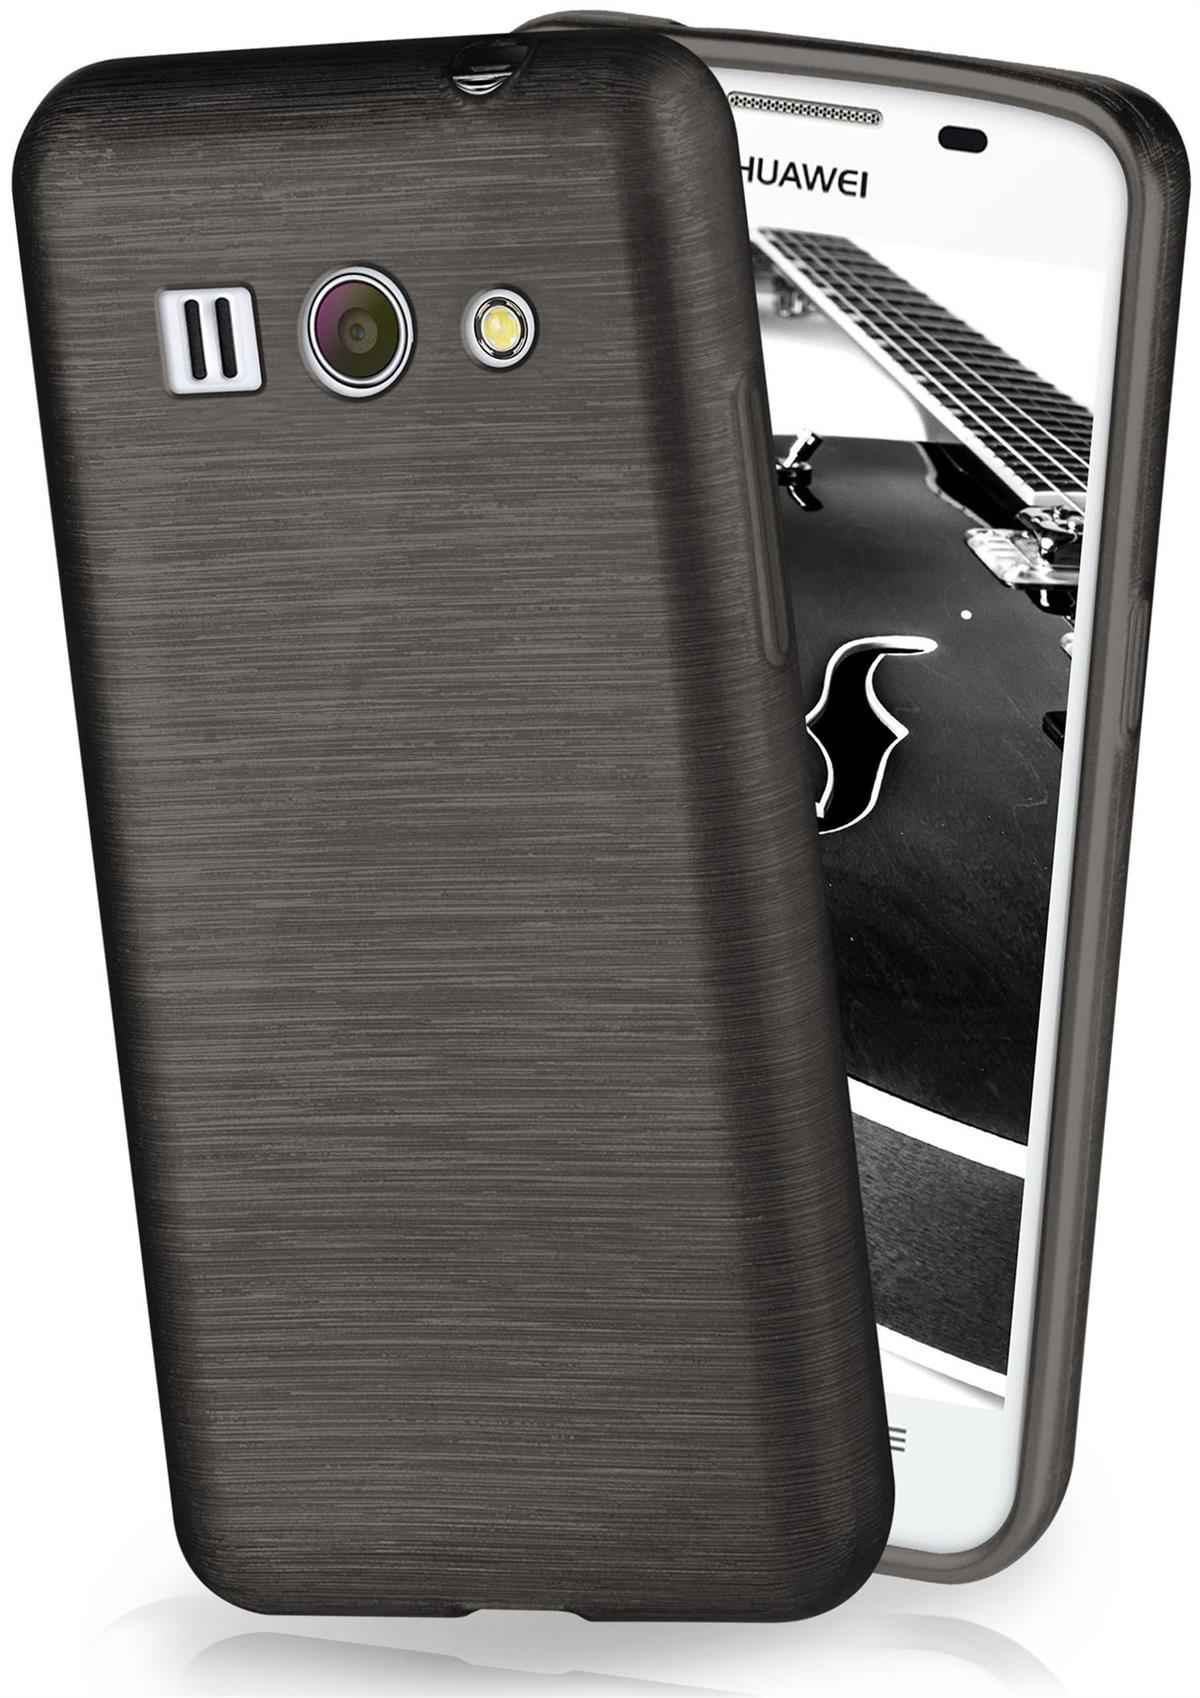 MOEX Brushed Case, Backcover, Huawei, Onyx-Black G520, Ascend